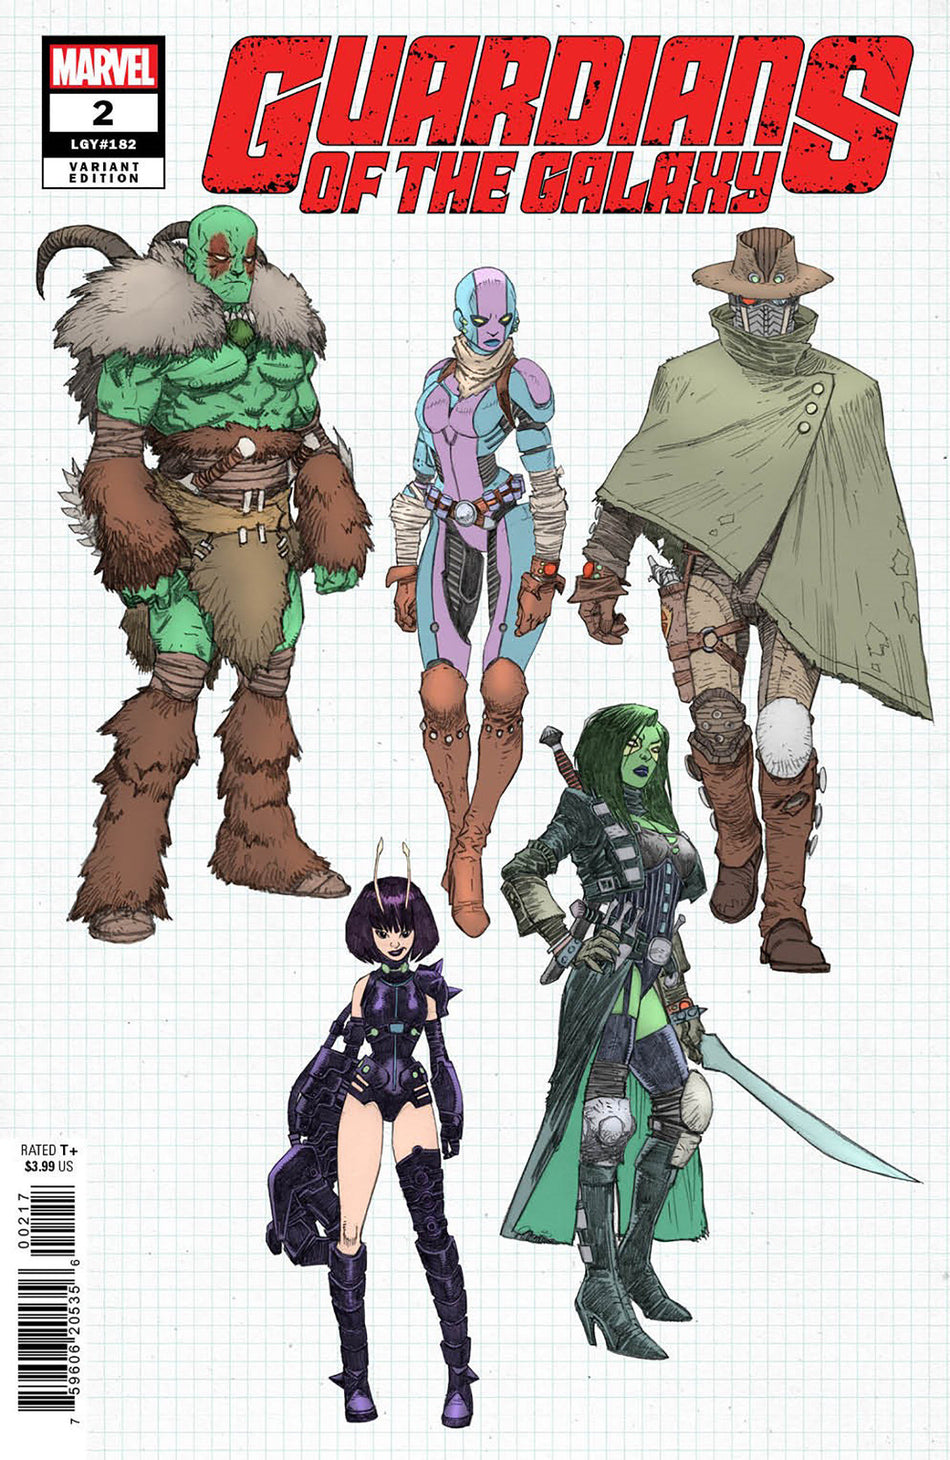 Stock Photo of Guardians Of The Galaxy 2 1:10 Kev Walker Design Variant comic sold by Stronghold Collectibles